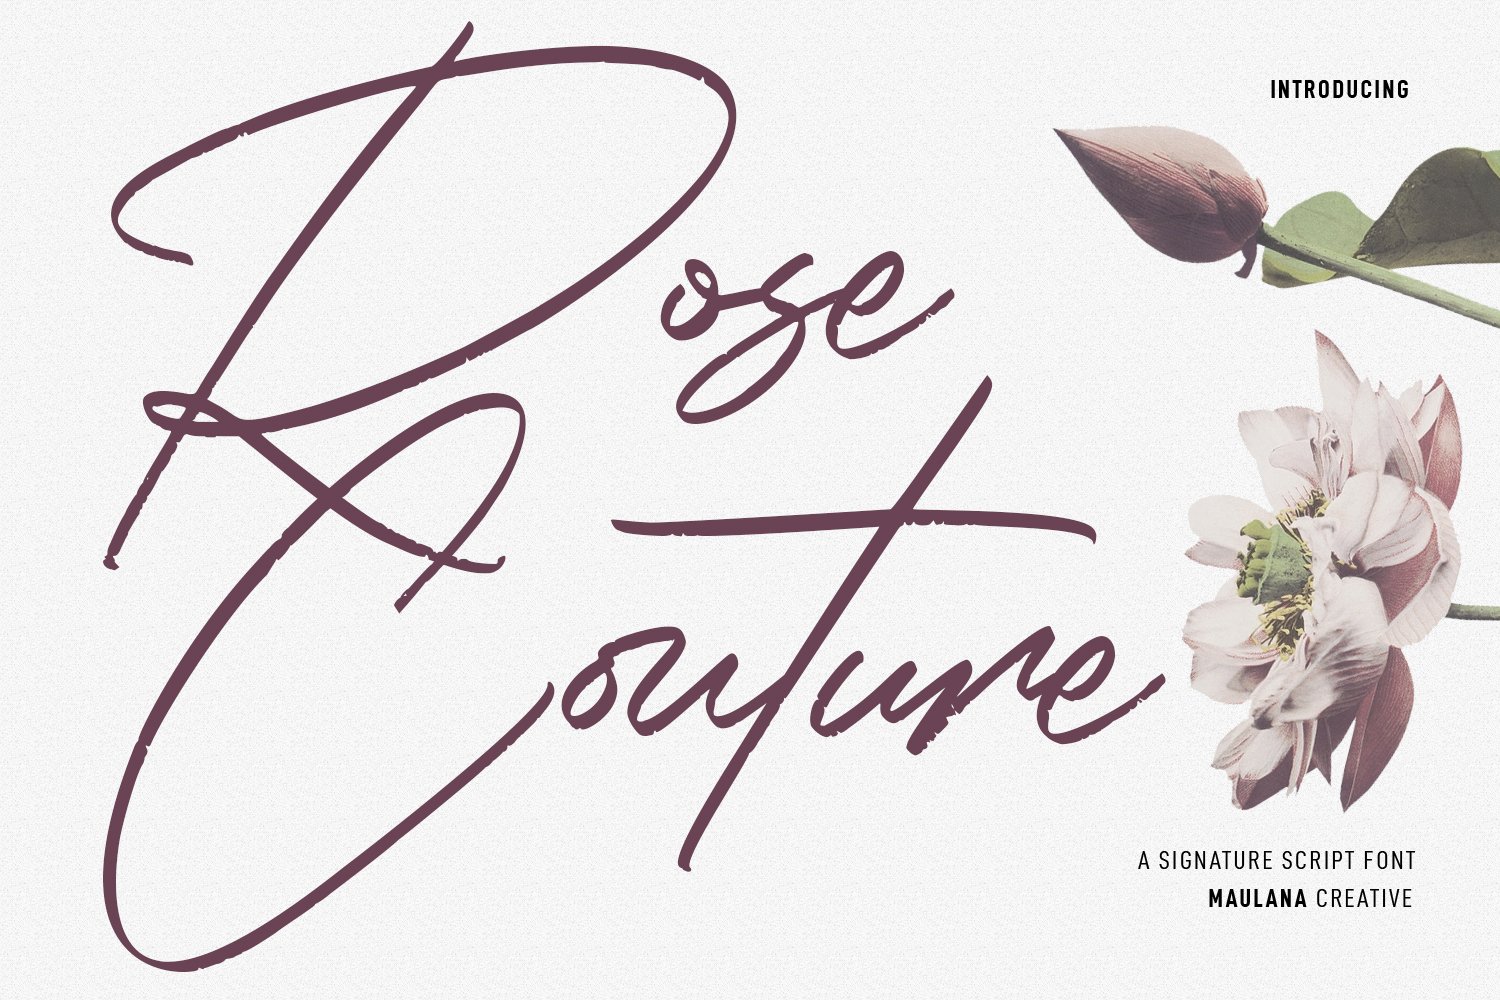 Rose Couture Signature Font cover image.